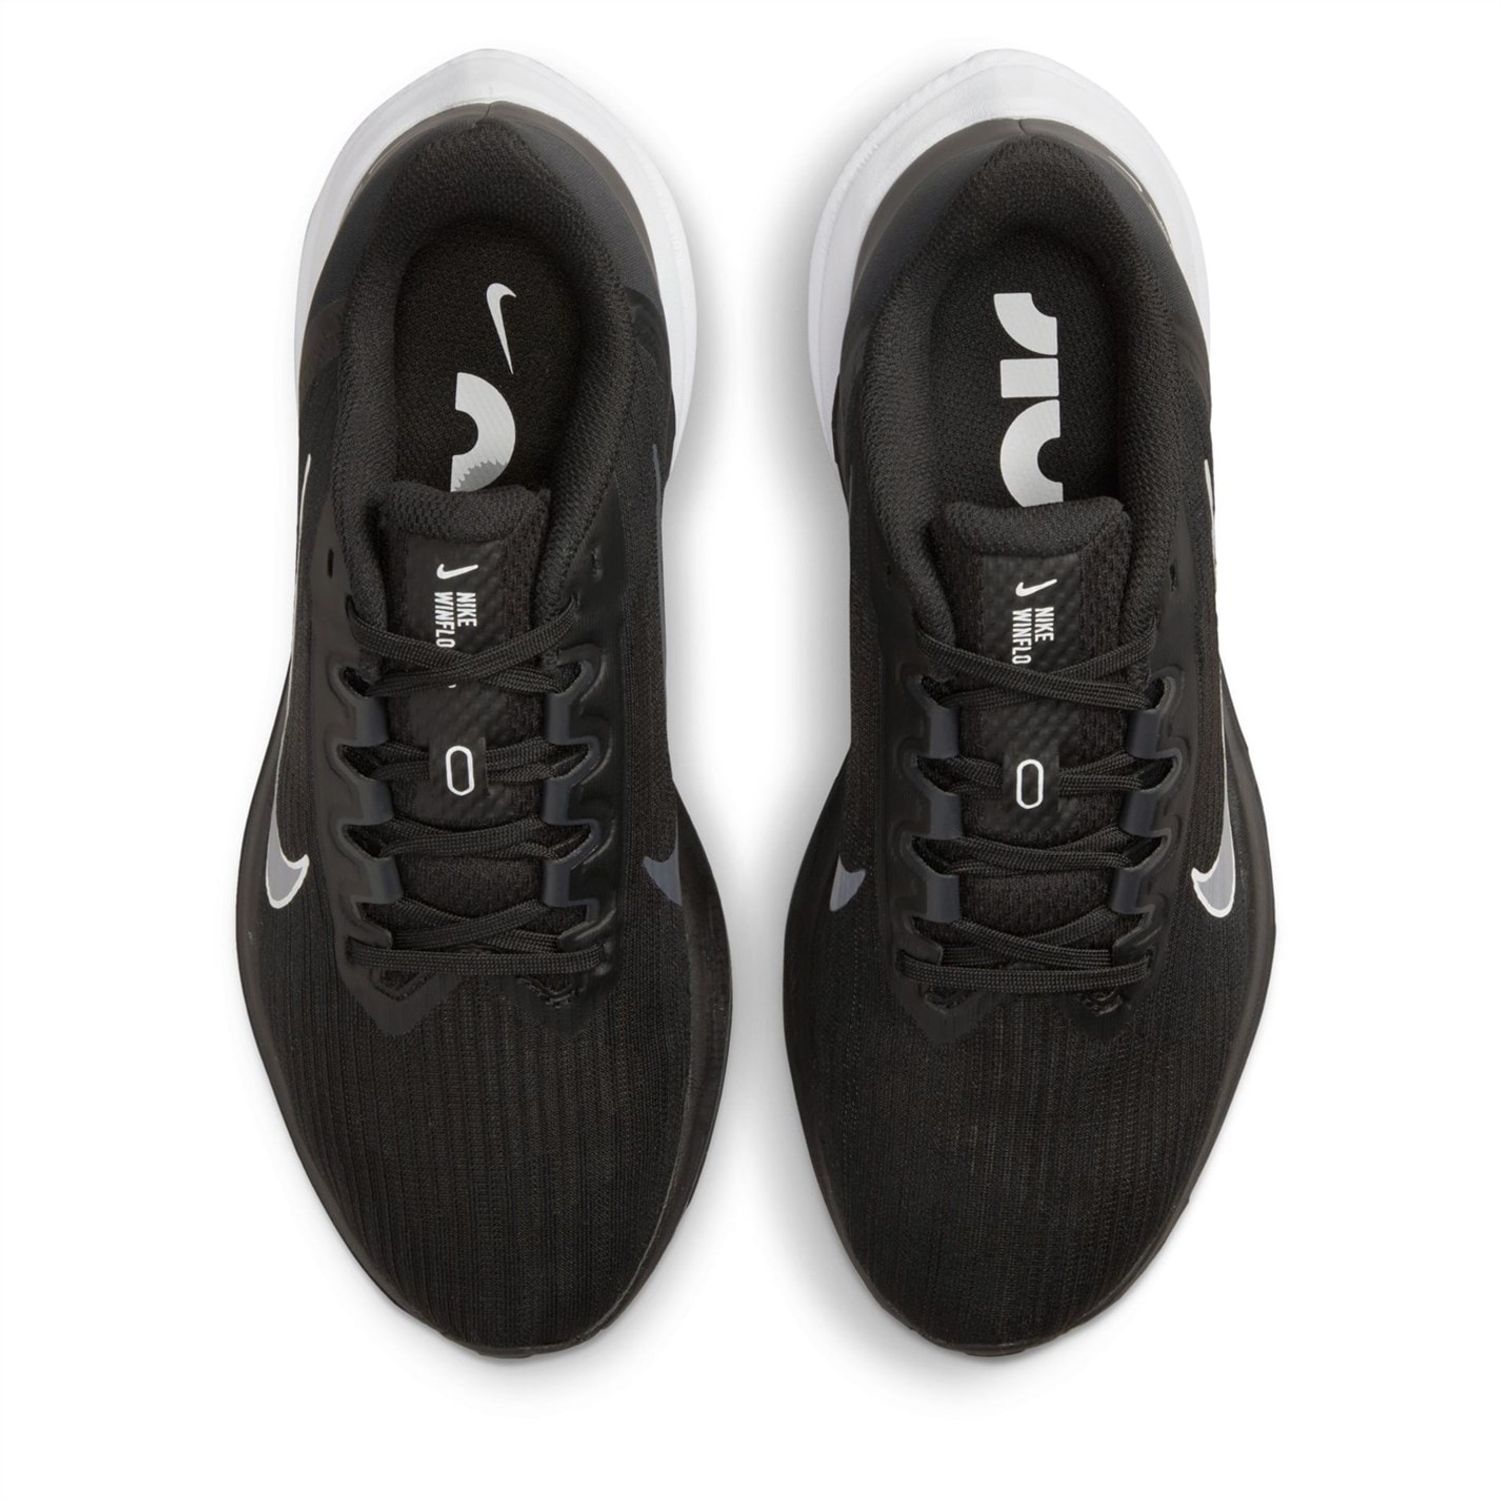 Black Nike Womens Air Winflo 9 Road Running Shoes - Get The Label